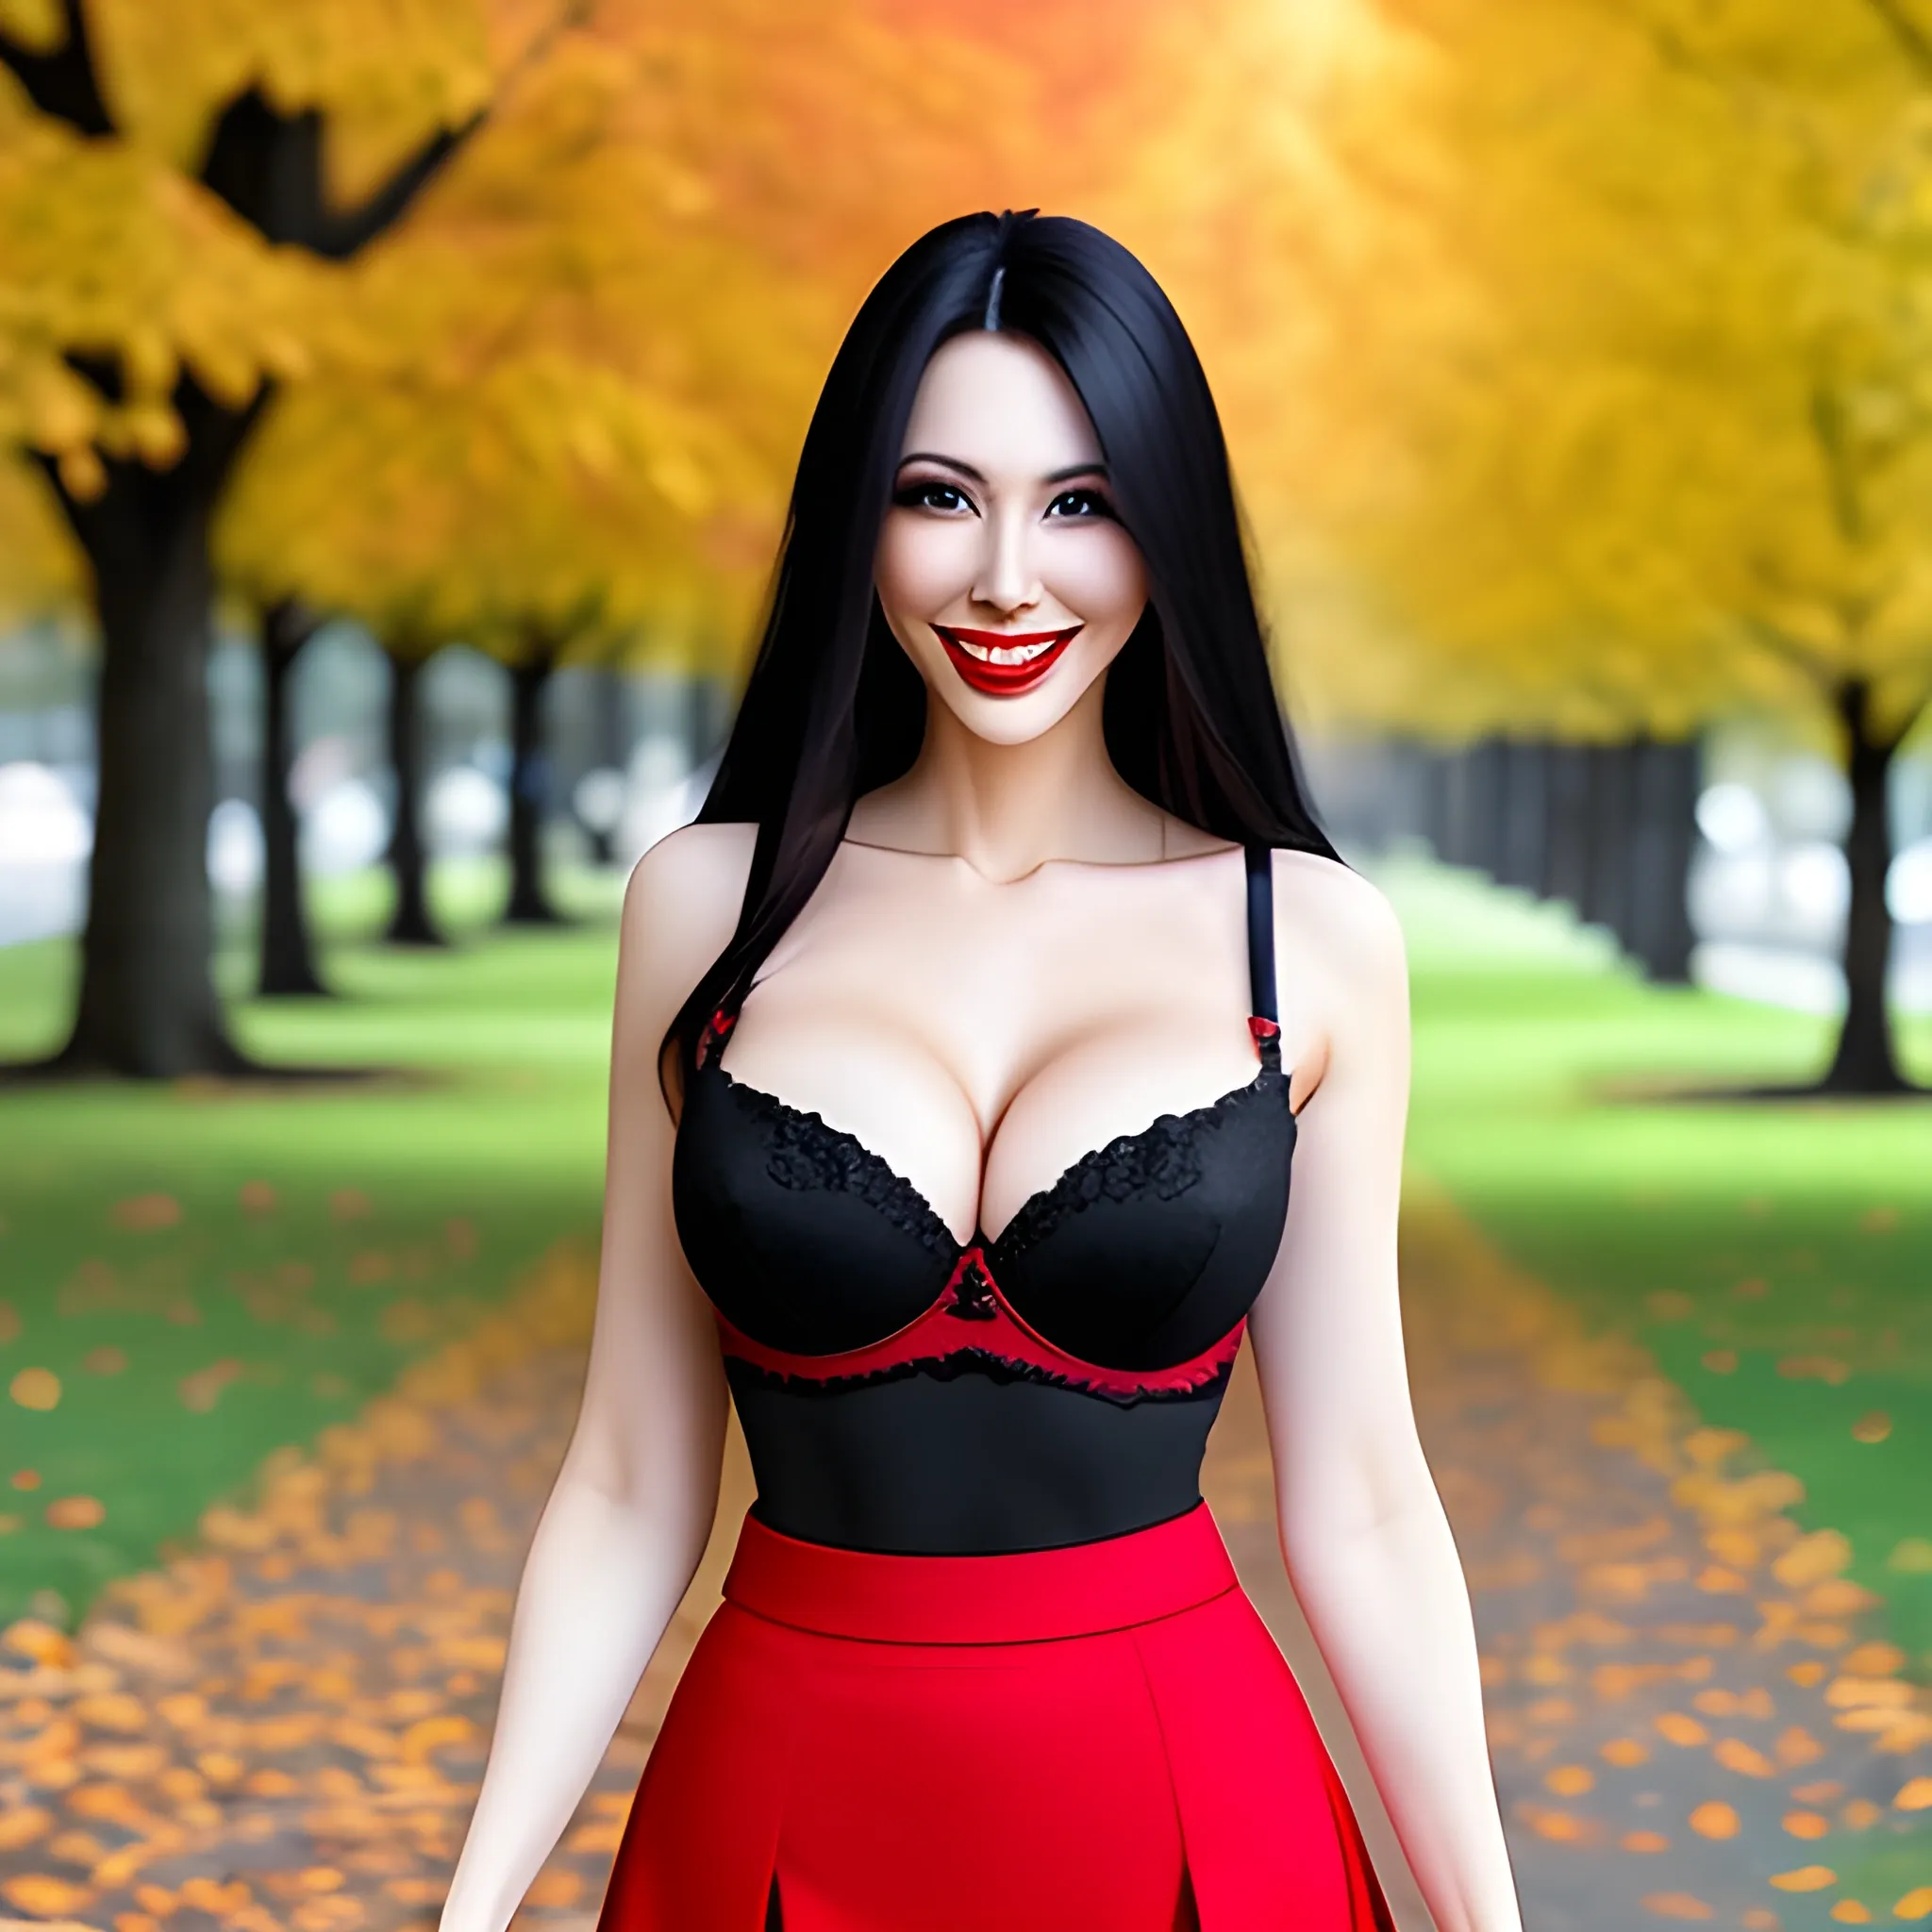  portrait of beautiful smile young instagram model girl with long black messy hair and stunning , red skirt, also wear beautiful bra,stunning, in park background

